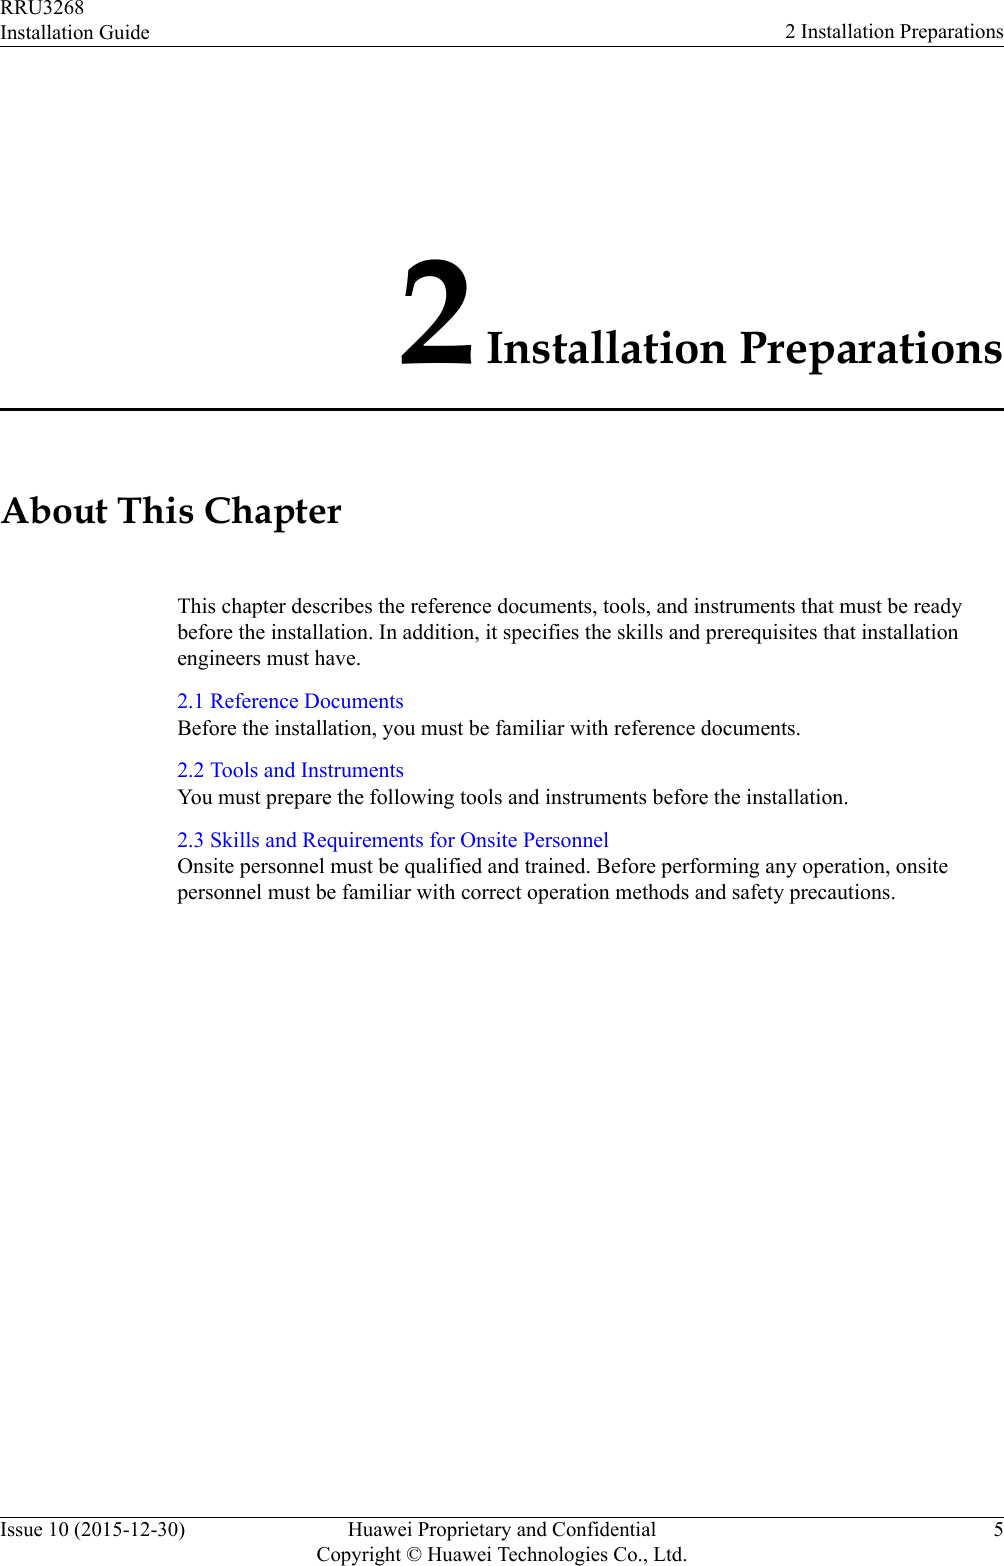 2 Installation PreparationsAbout This ChapterThis chapter describes the reference documents, tools, and instruments that must be readybefore the installation. In addition, it specifies the skills and prerequisites that installationengineers must have.2.1 Reference DocumentsBefore the installation, you must be familiar with reference documents.2.2 Tools and InstrumentsYou must prepare the following tools and instruments before the installation.2.3 Skills and Requirements for Onsite PersonnelOnsite personnel must be qualified and trained. Before performing any operation, onsitepersonnel must be familiar with correct operation methods and safety precautions.RRU3268Installation Guide 2 Installation PreparationsIssue 10 (2015-12-30) Huawei Proprietary and ConfidentialCopyright © Huawei Technologies Co., Ltd.5